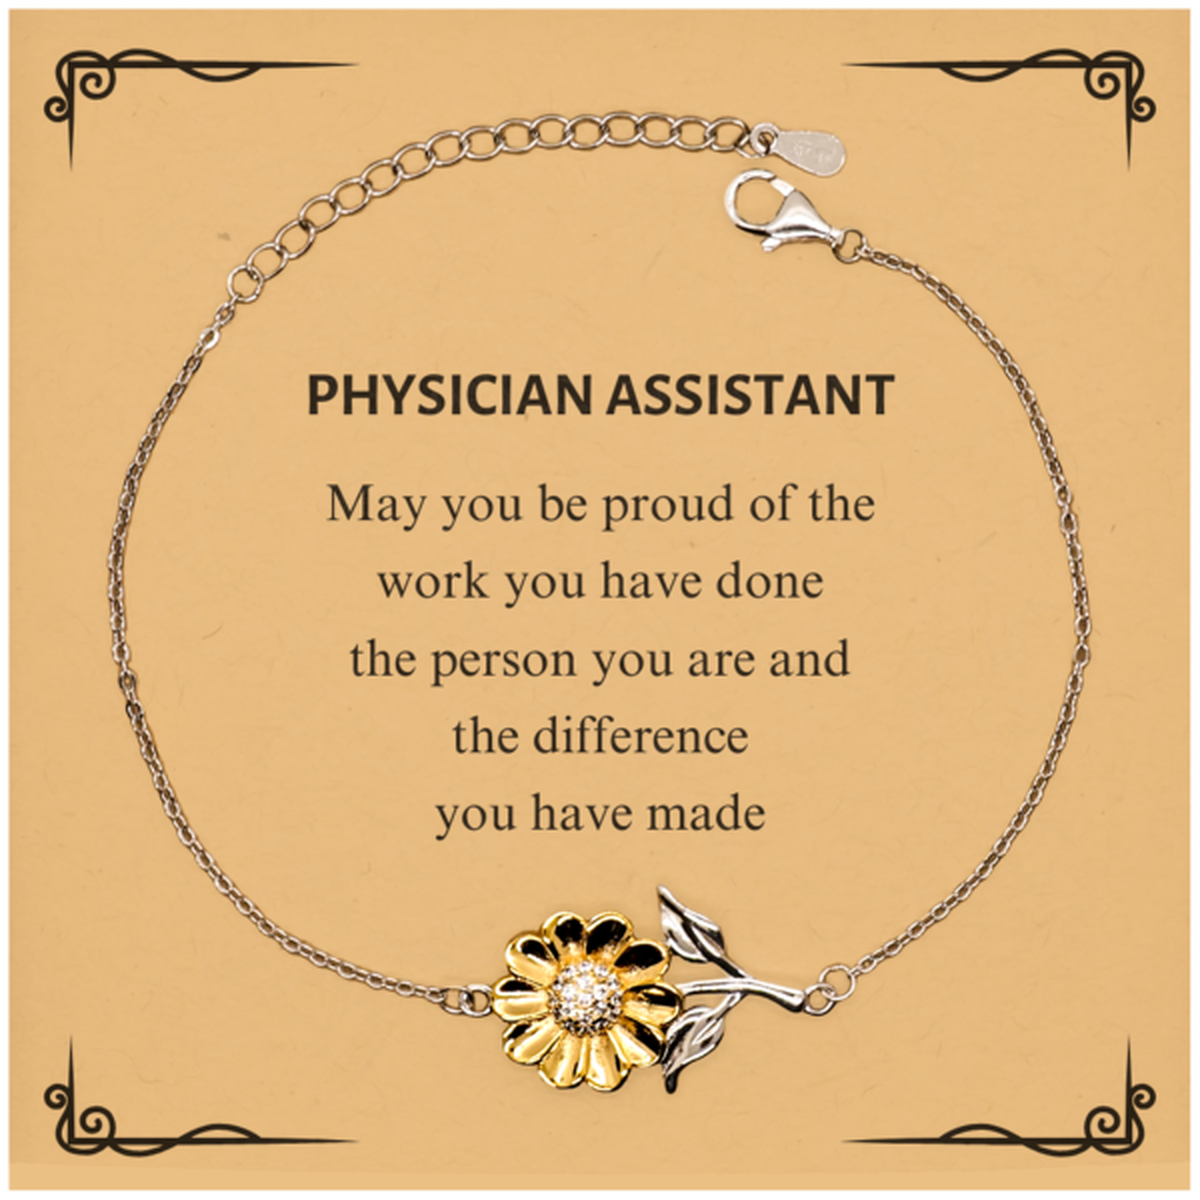 Physician Assistant May you be proud of the work you have done, Retirement Physician Assistant Sunflower Bracelet for Colleague Appreciation Gifts Amazing for Physician Assistant